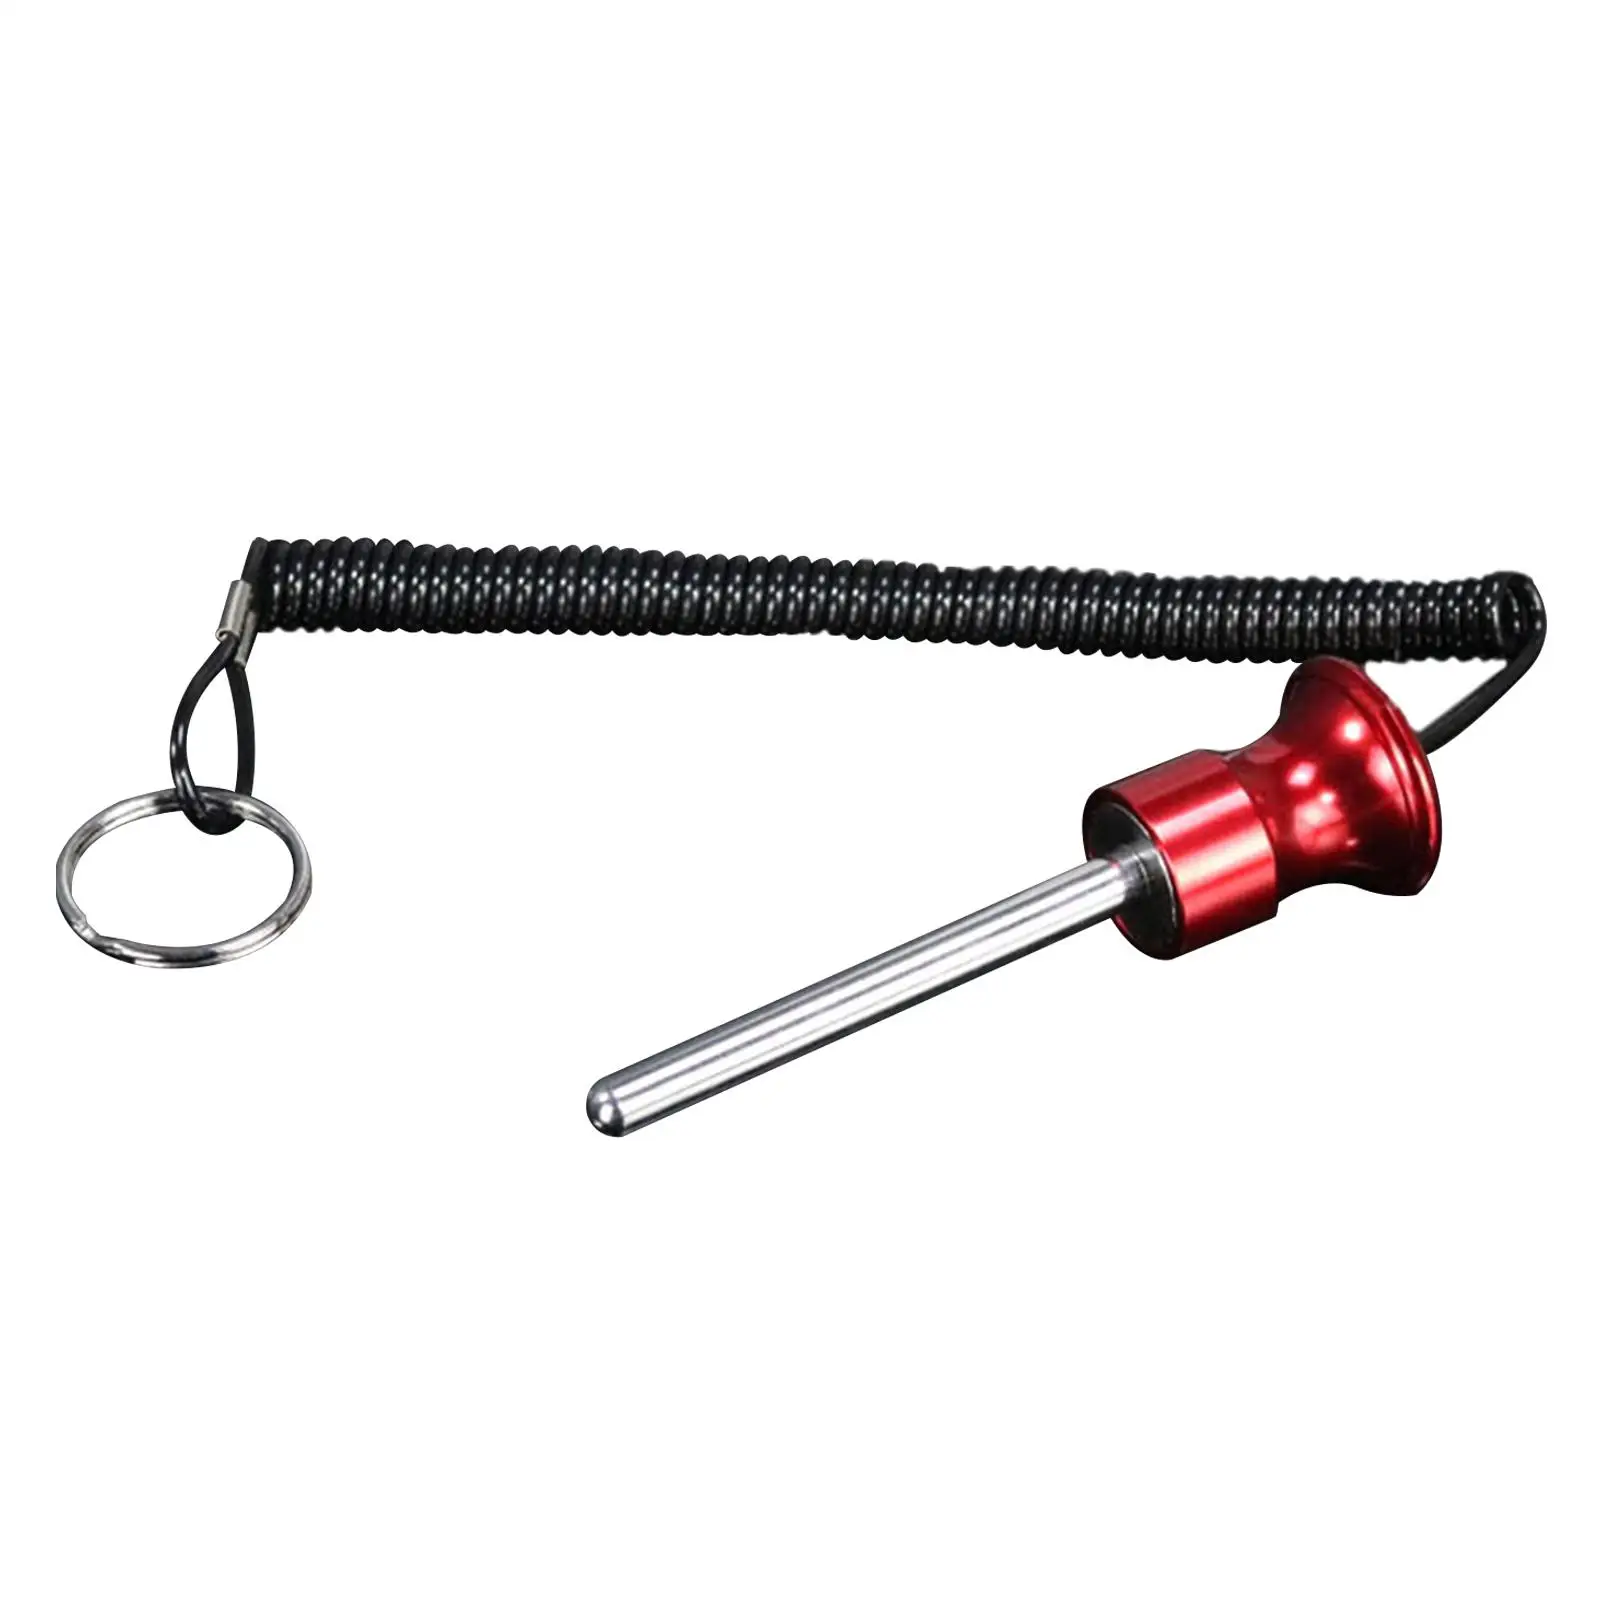 Universal  Weight Stack Pin Fitness Exercise with Laynard Replacement Training Accessories Selector Lock Pins Home Gym